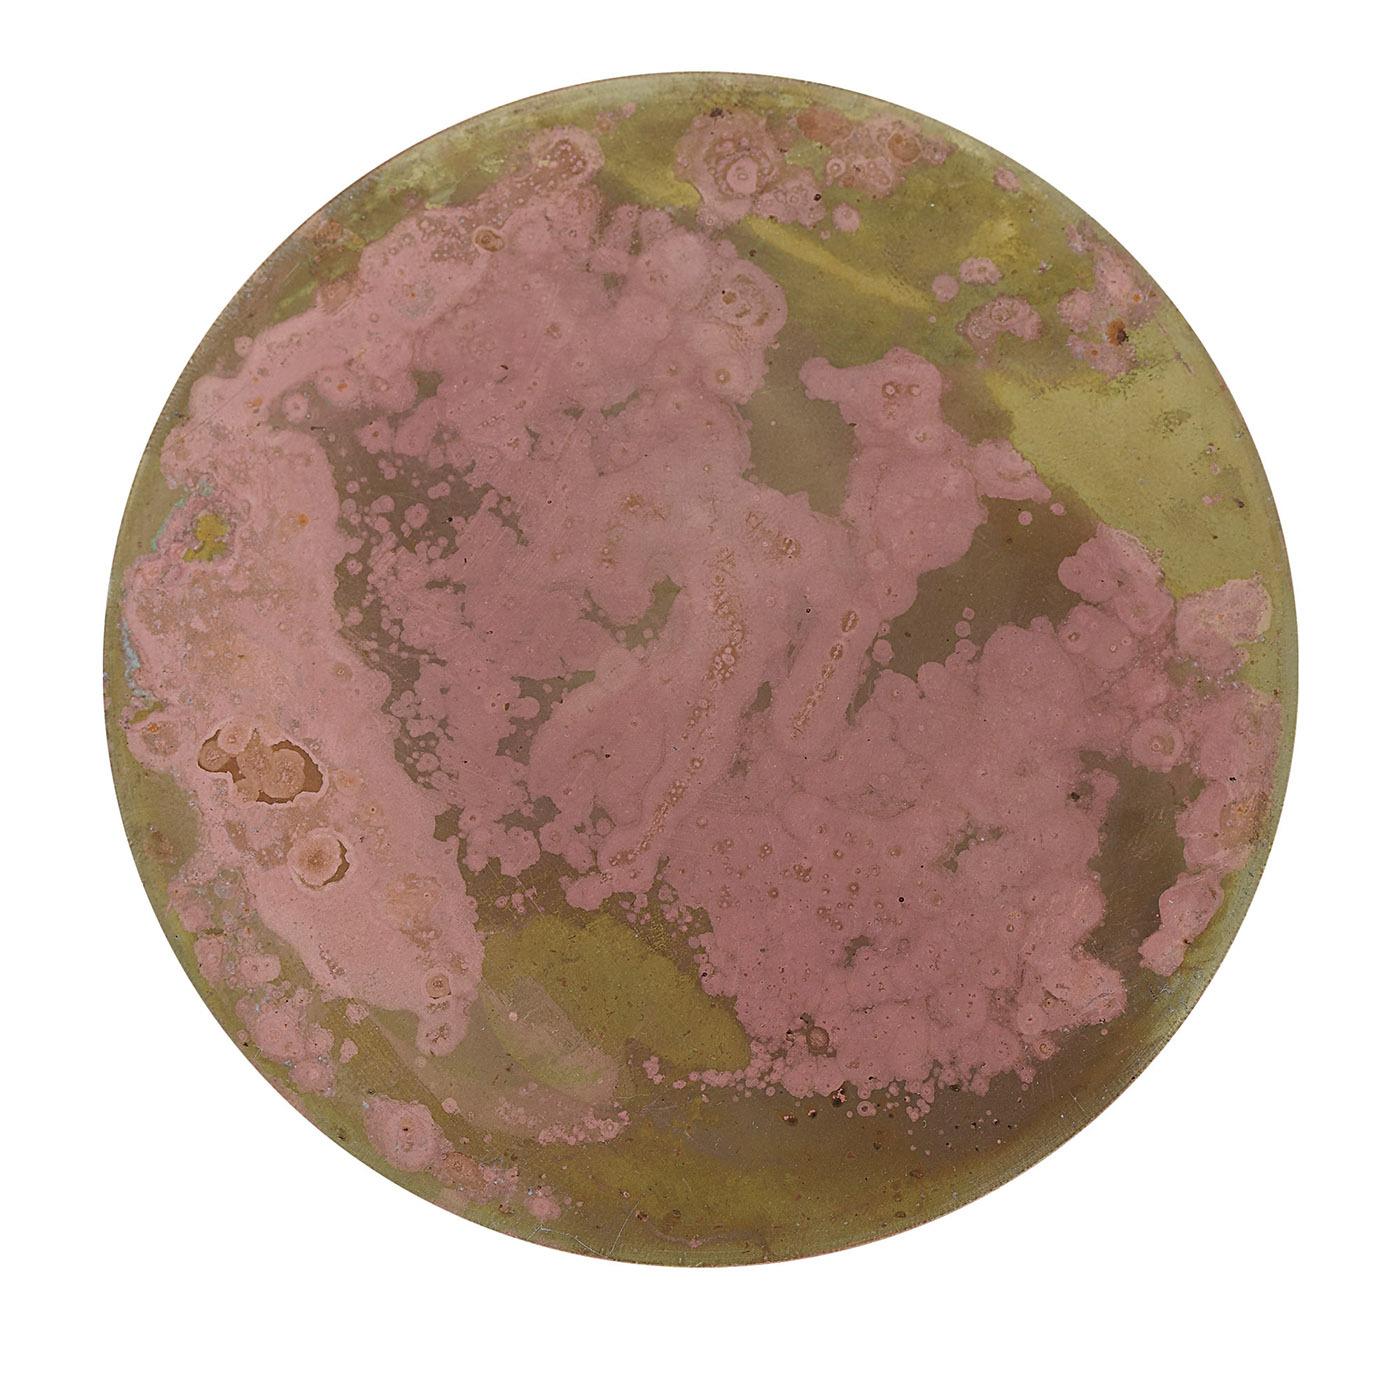 Six brass disks artfully treated with acids and oxides up to achieve their shaded green backdrop and mottled pink design make up this exclusive set of coasters. Covered with a velvety material for optimized grip and their front protected by multiple